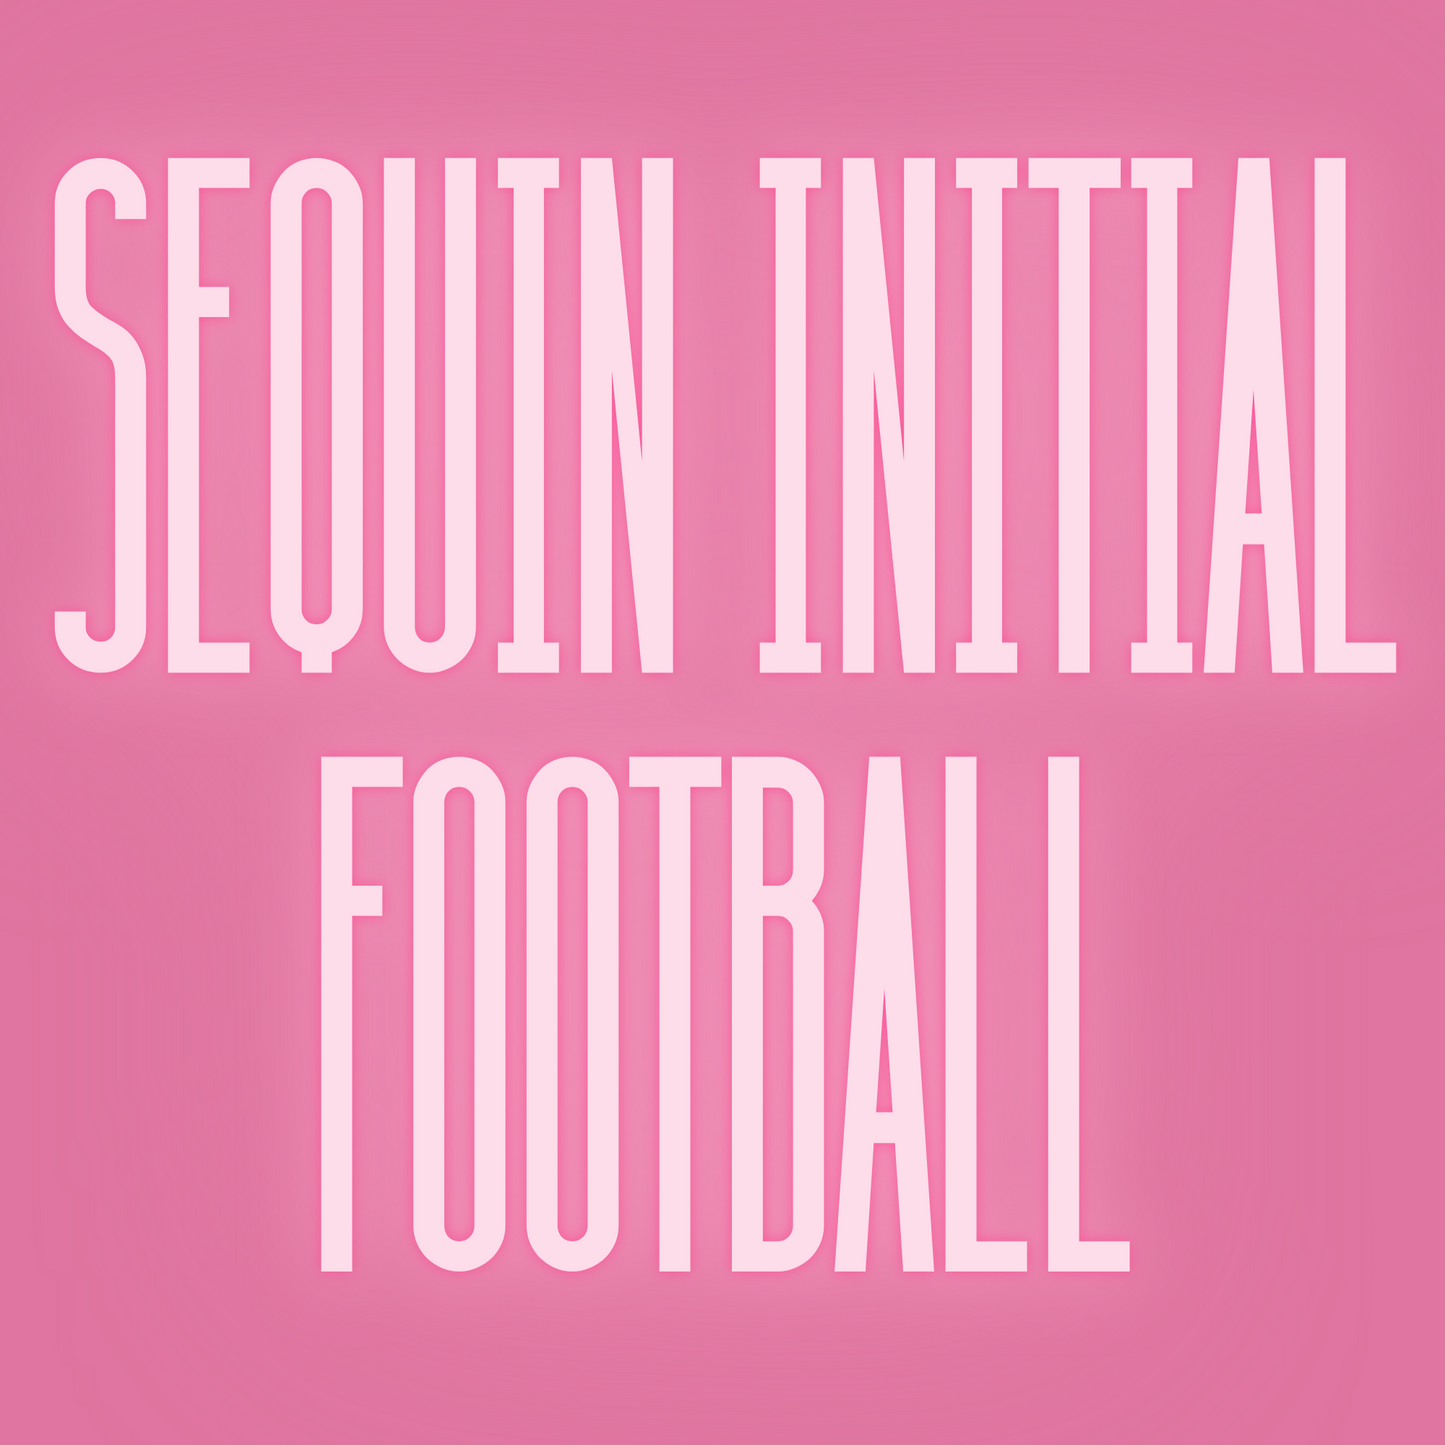 Sequin Initial Football - Toddler/Youth WS